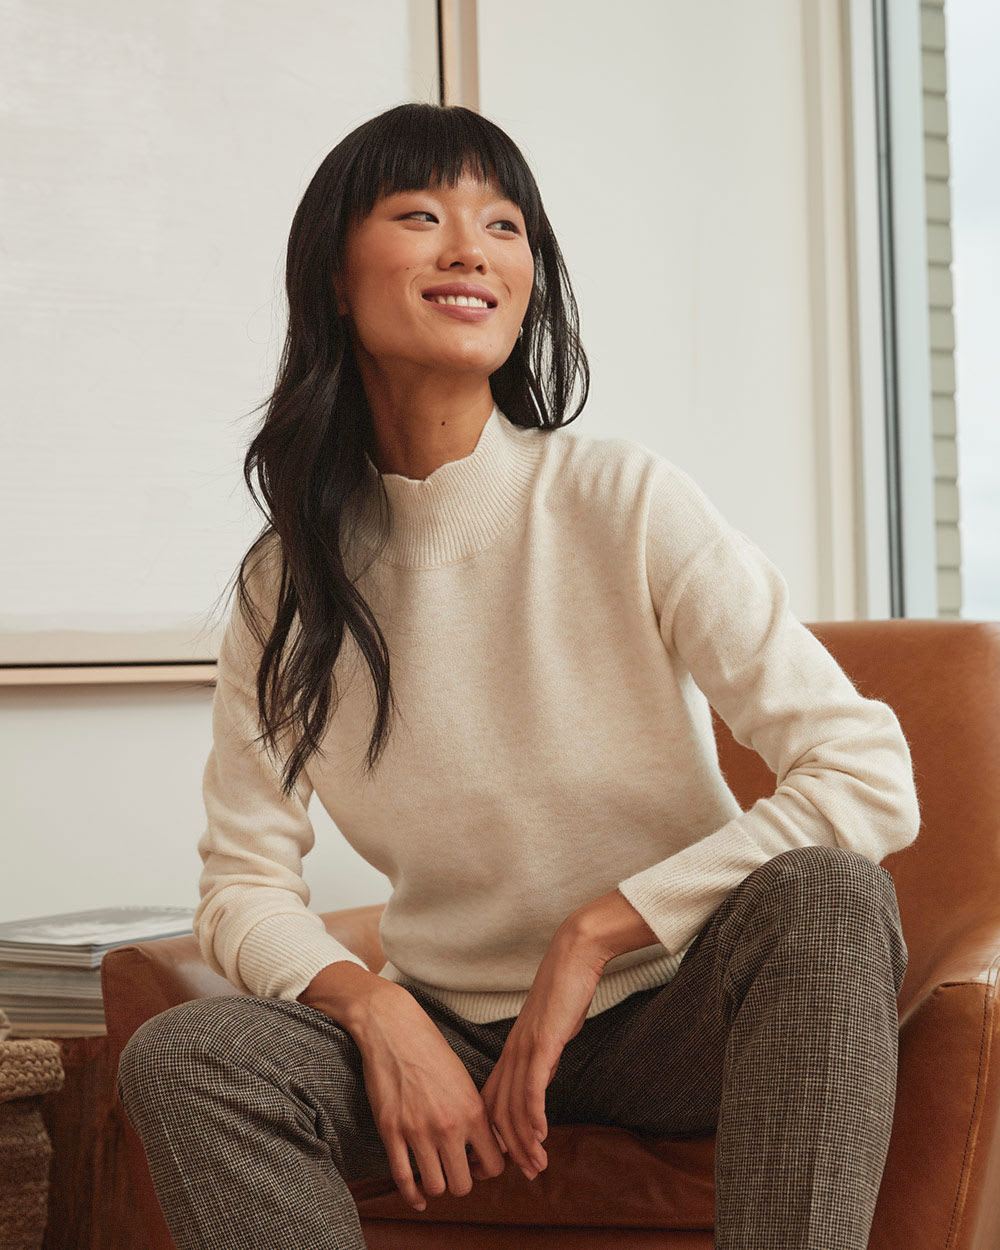 Soft Spongy Knit Sweater with Scalloped Edges